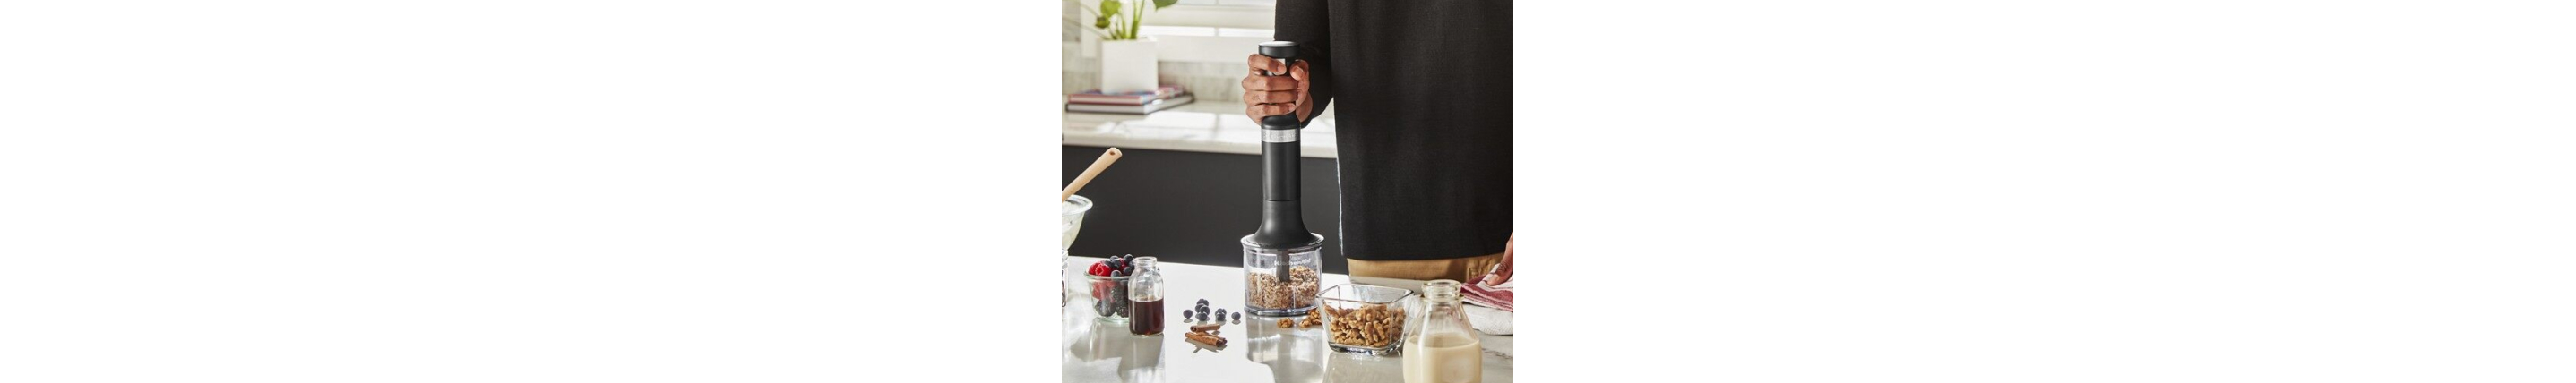 https://kitchenaid-h.assetsadobe.com/is/image/content/dam/business-unit/kitchenaid/en-us/marketing-content/site-assets/page-content/pinch-of-help/heres-why-you-need-immersion-blender/heres-why-you-need-immersion-blender_Chop.jpg?fit=constrain&fmt=png-alpha&wid=2875